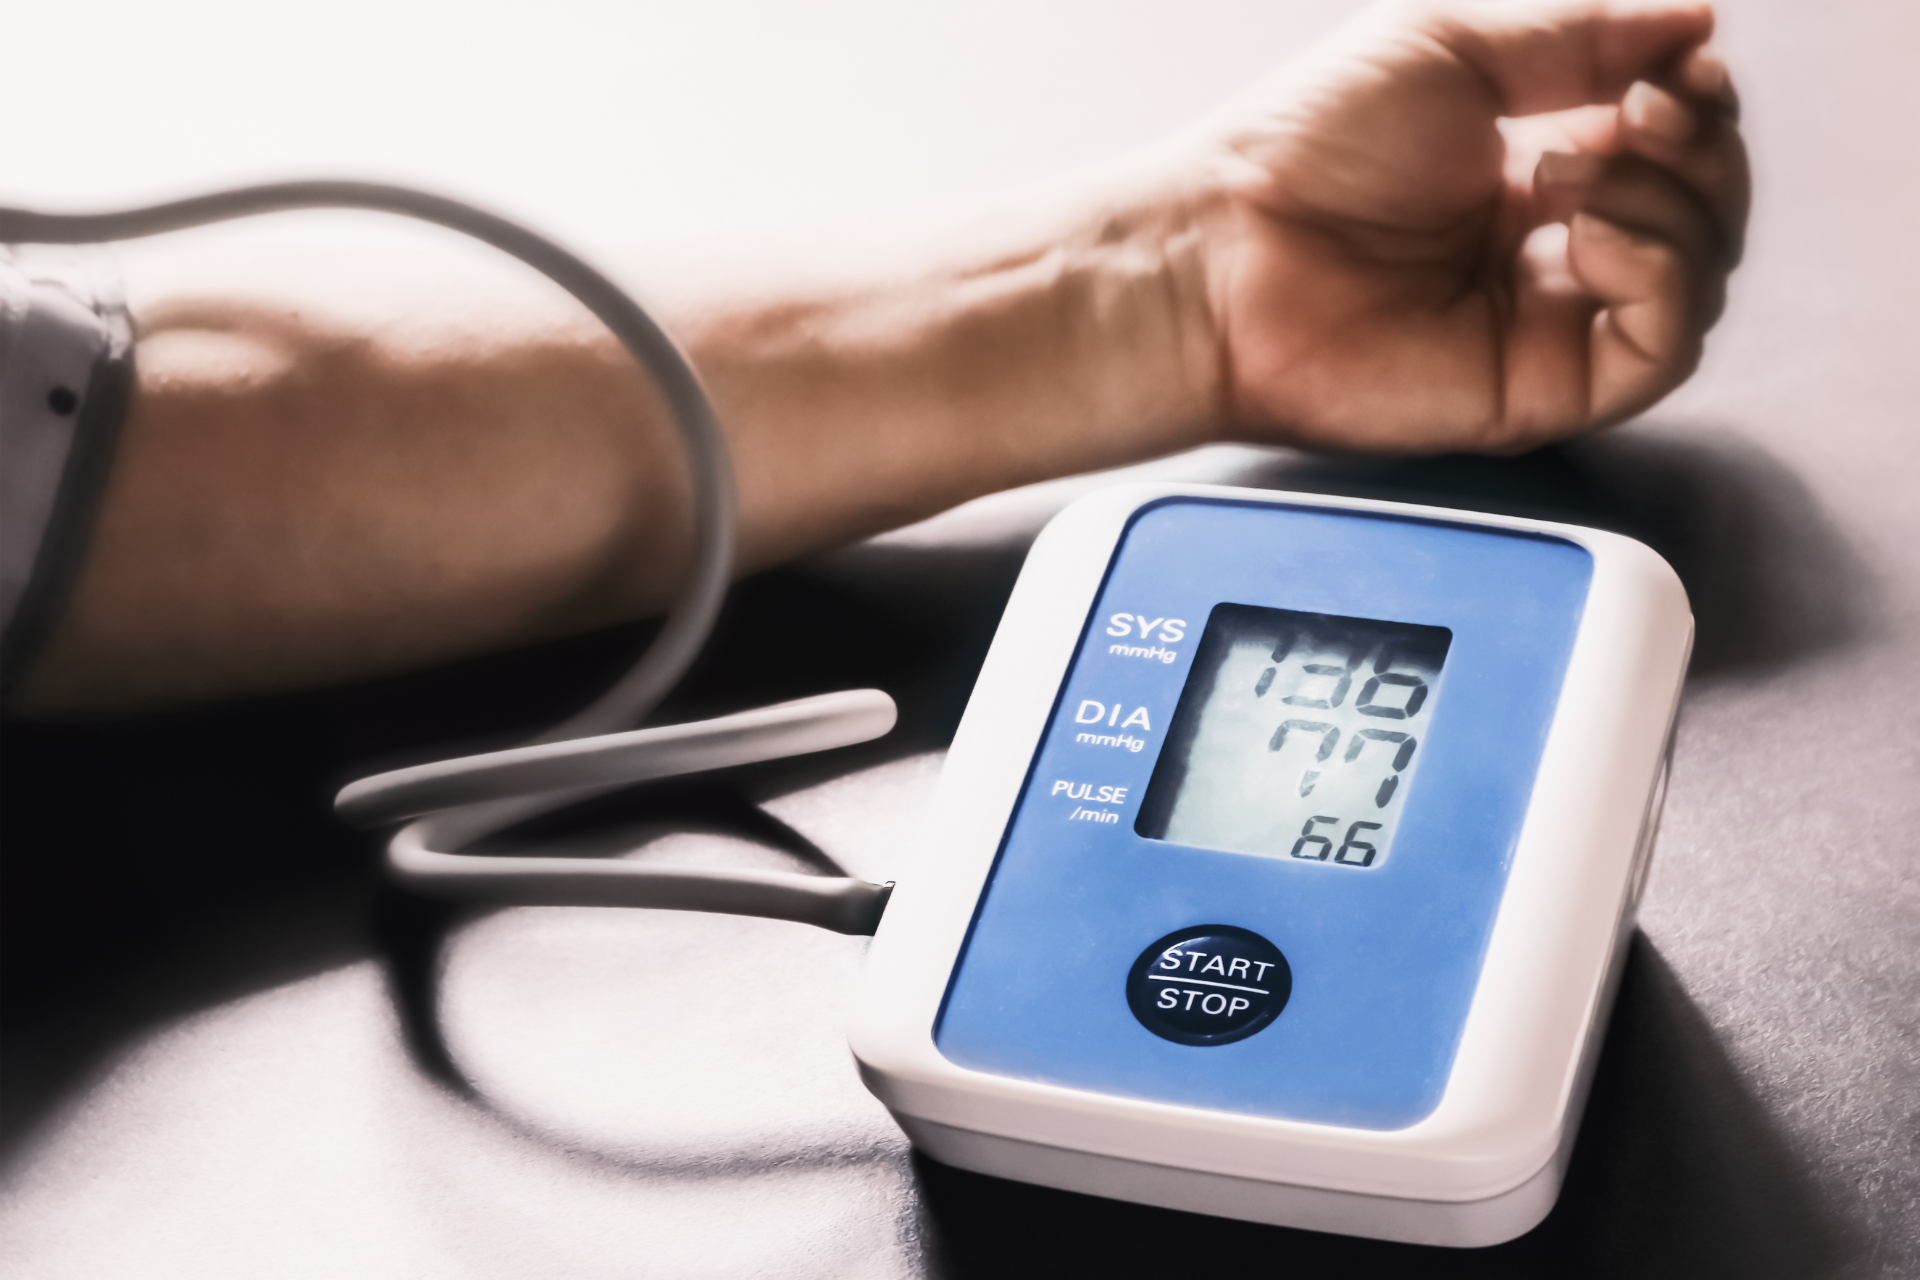 What is the normal blood pressure?